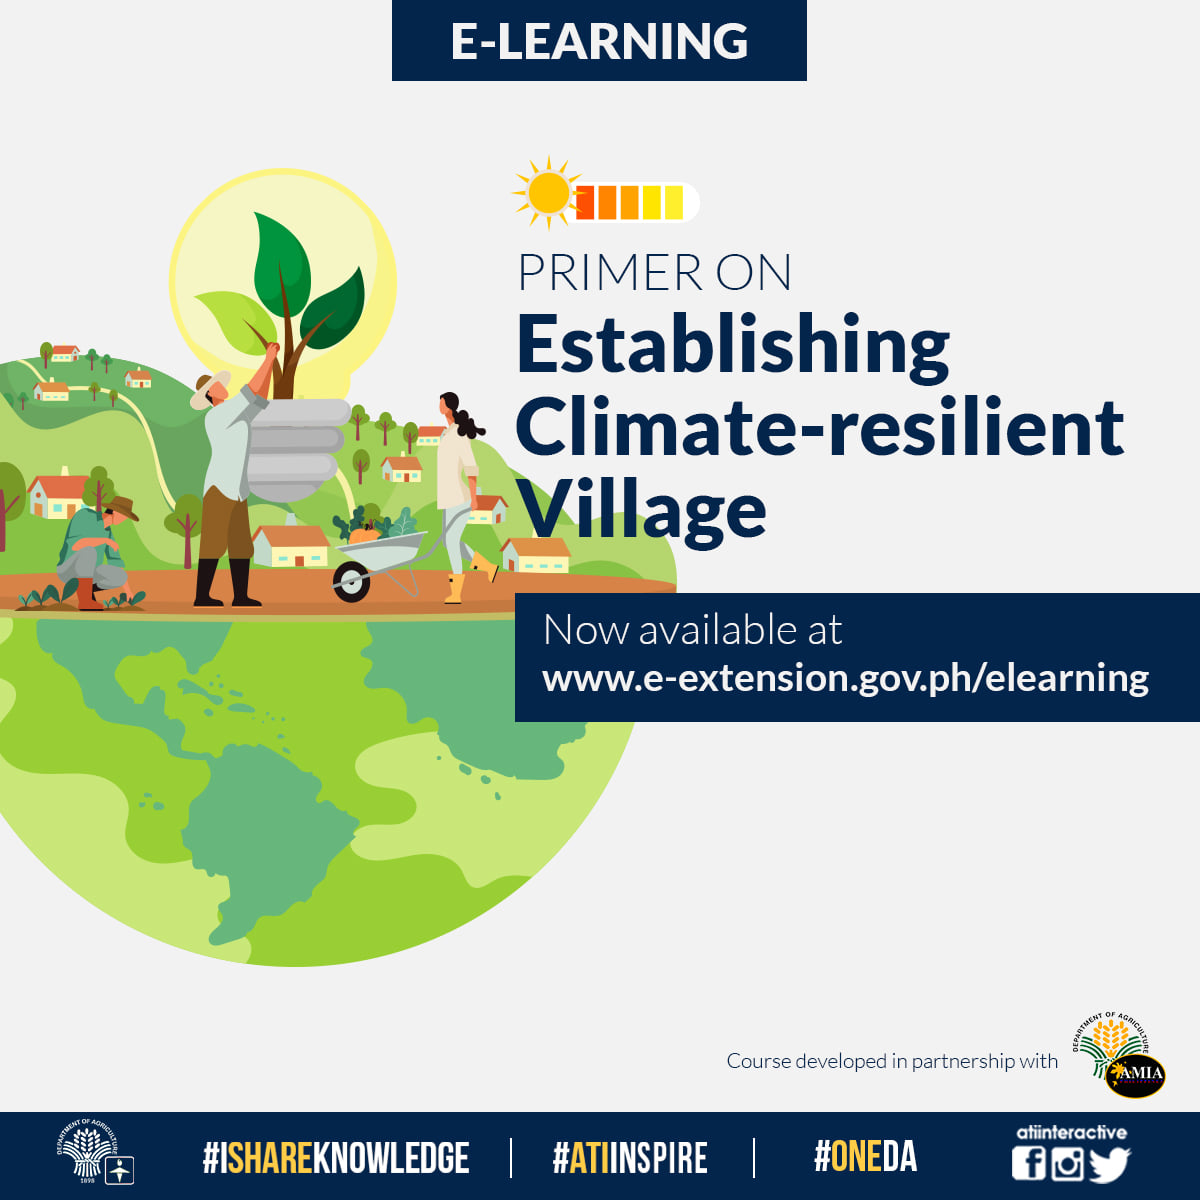 Primer on Establishing Climate-resilient Village and Module on Climate